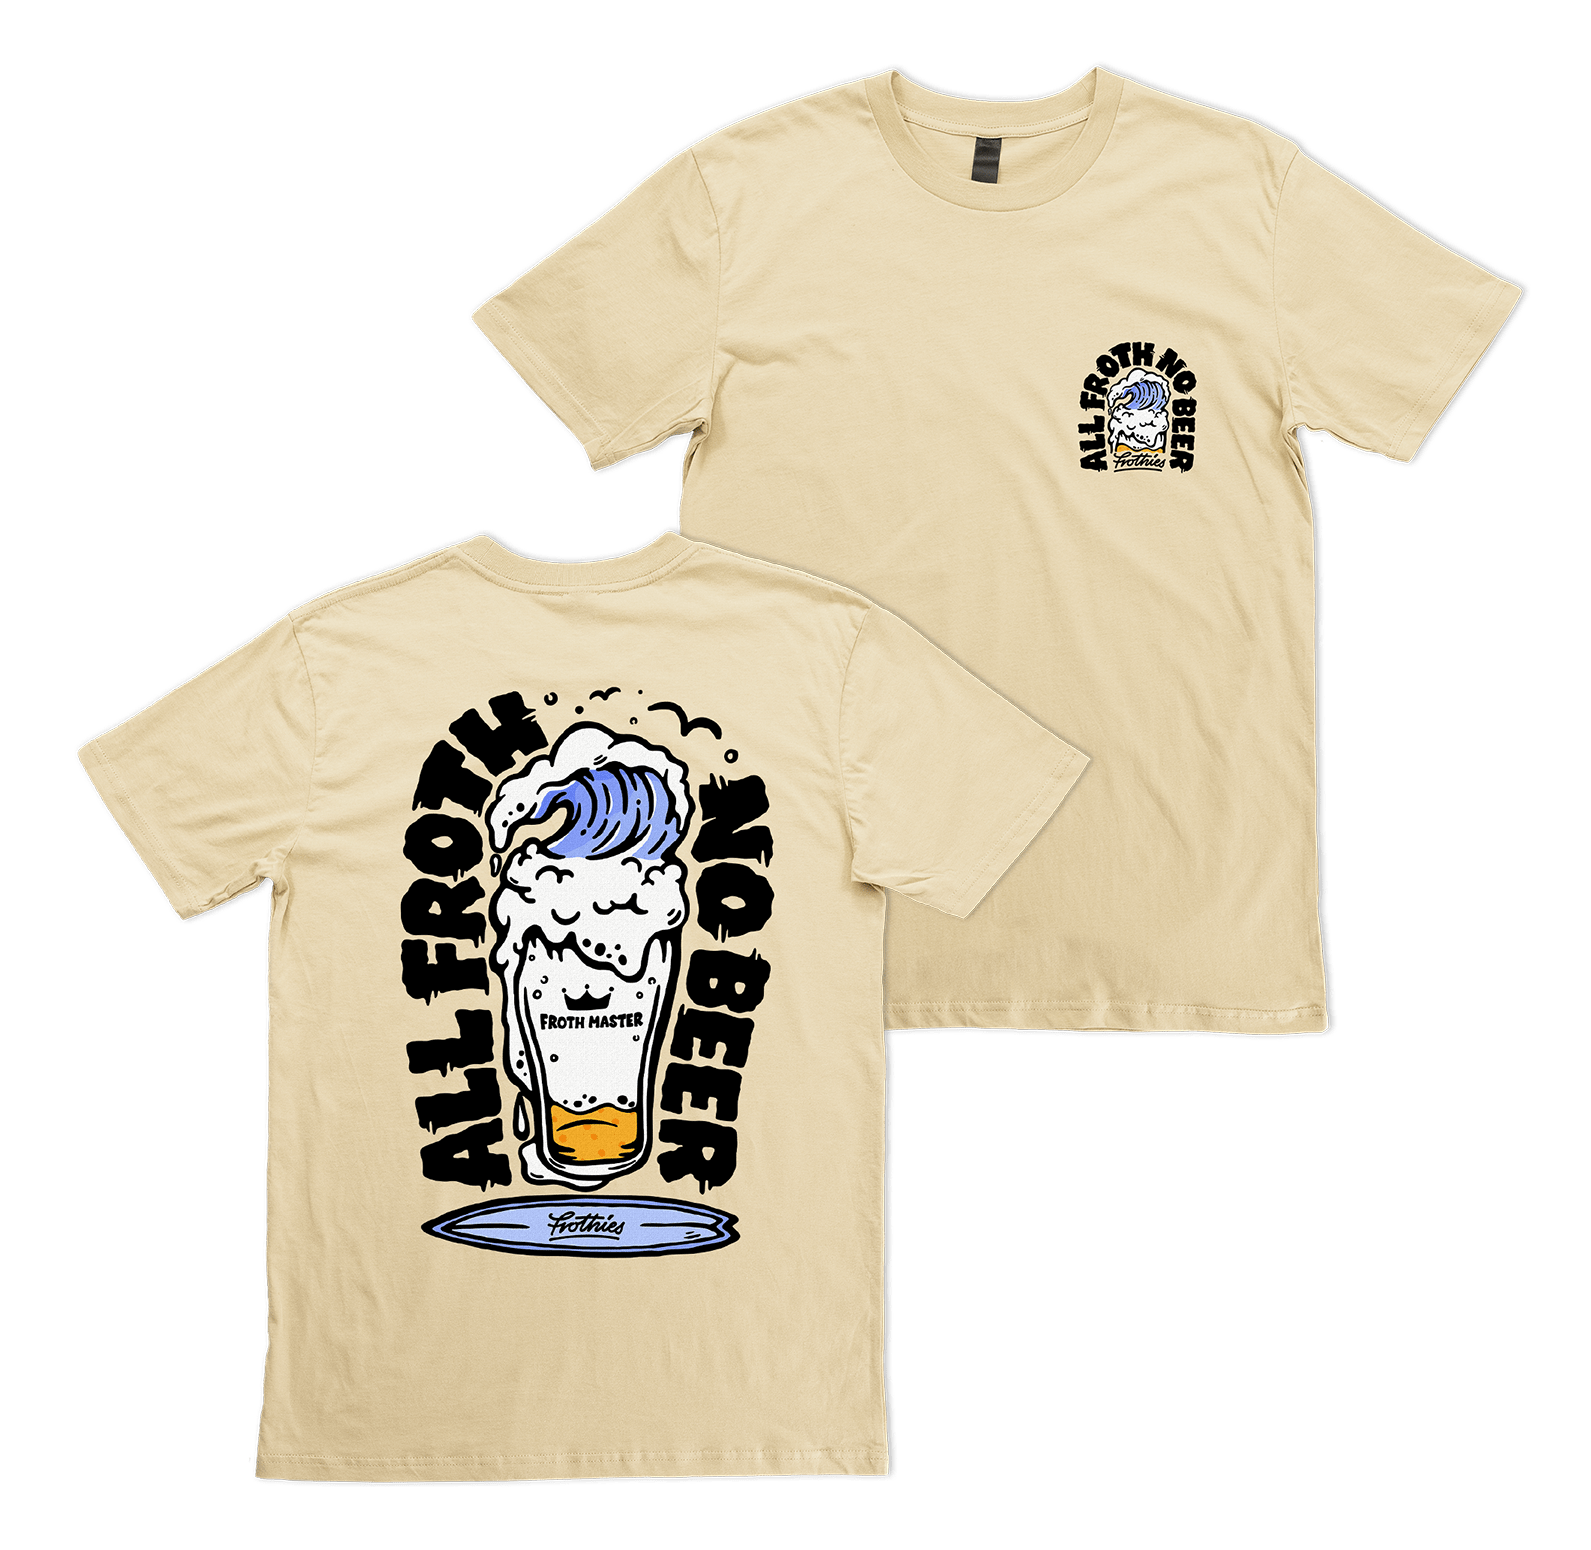 All Froth Tee T-Shirt Frothies